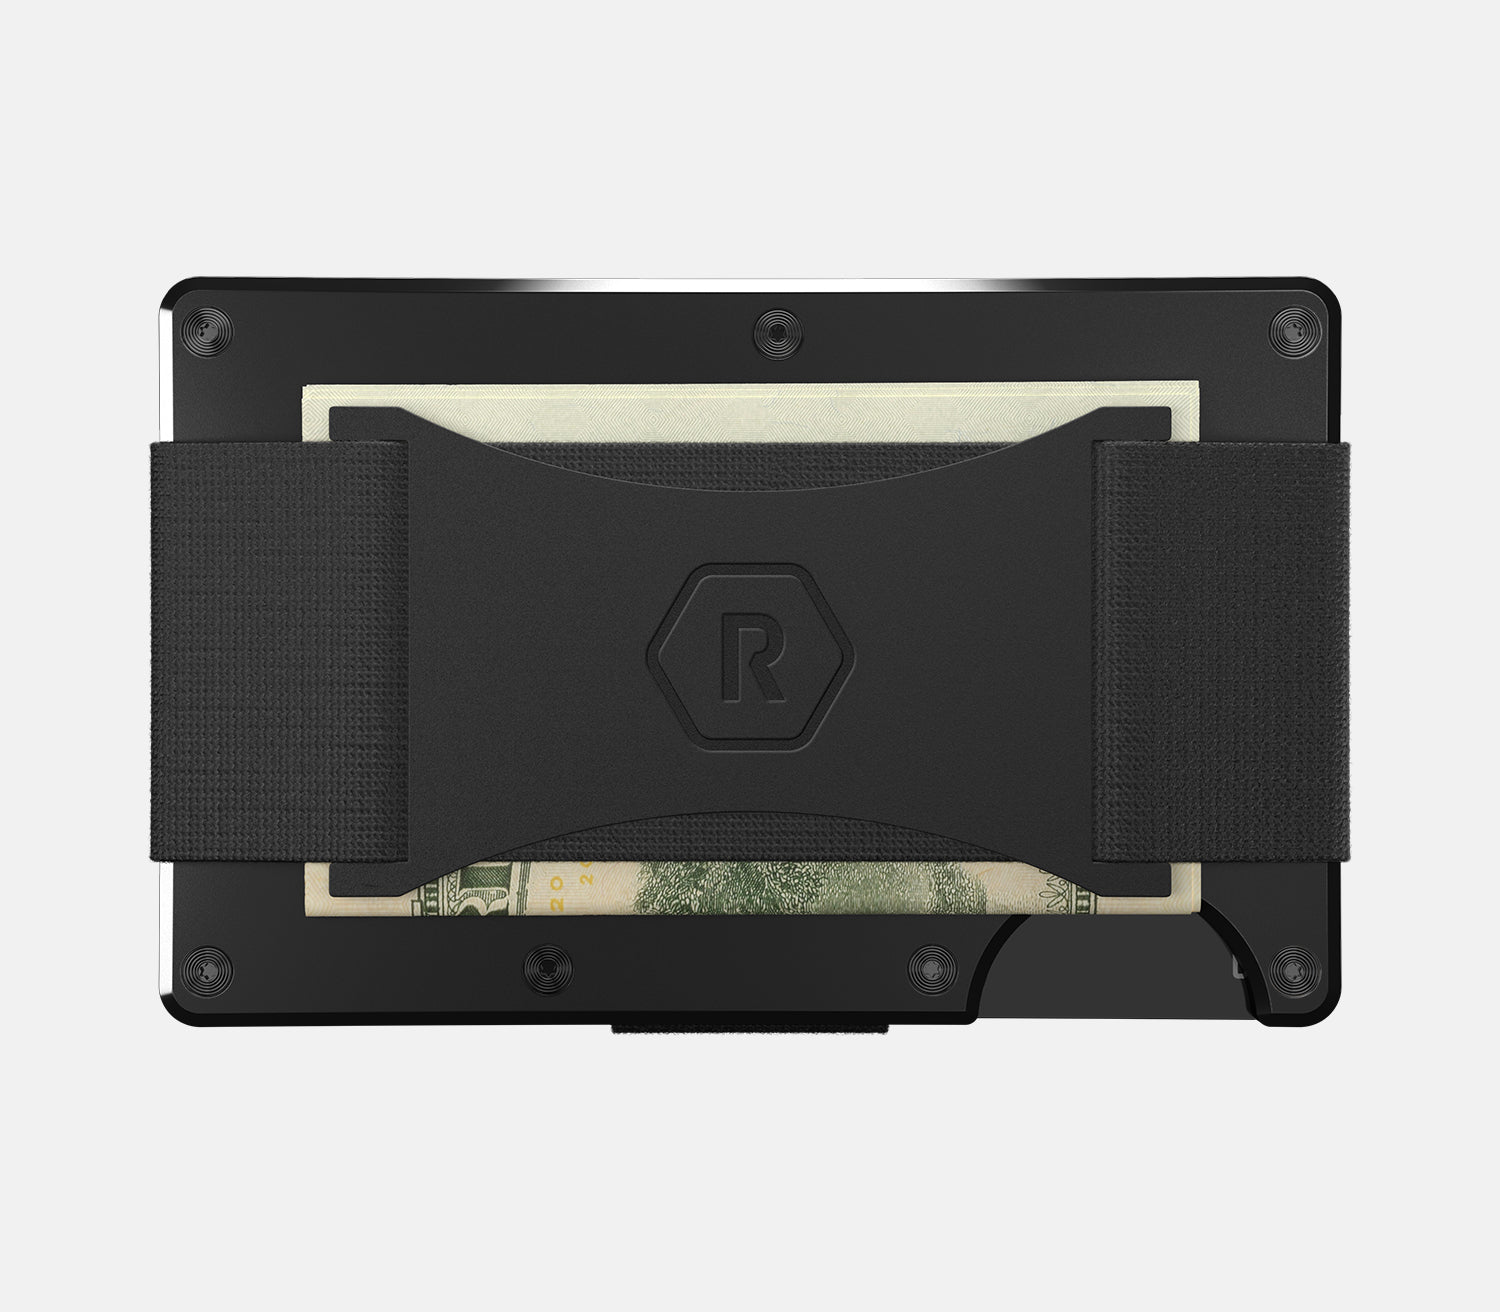 Ridge Wallet Black Friday Sale 2023: Up to 32% Off Wallets Today